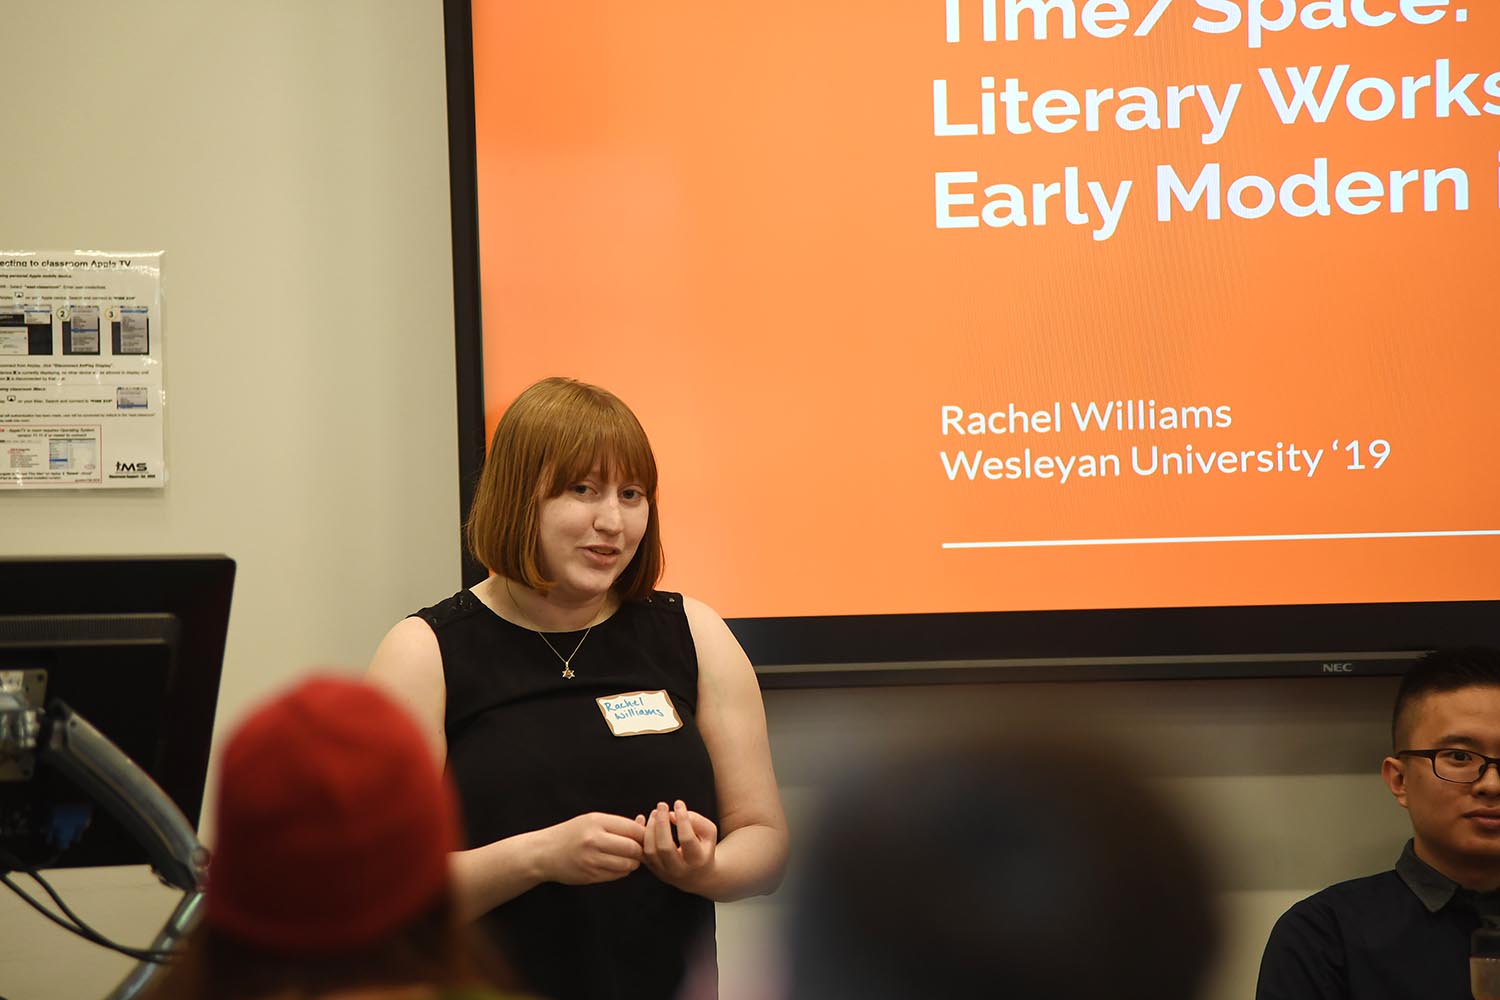 Rachel Williams '19 spoke on "Translation across Time/Space: Translating Literary Works from the Early Modern into Today."